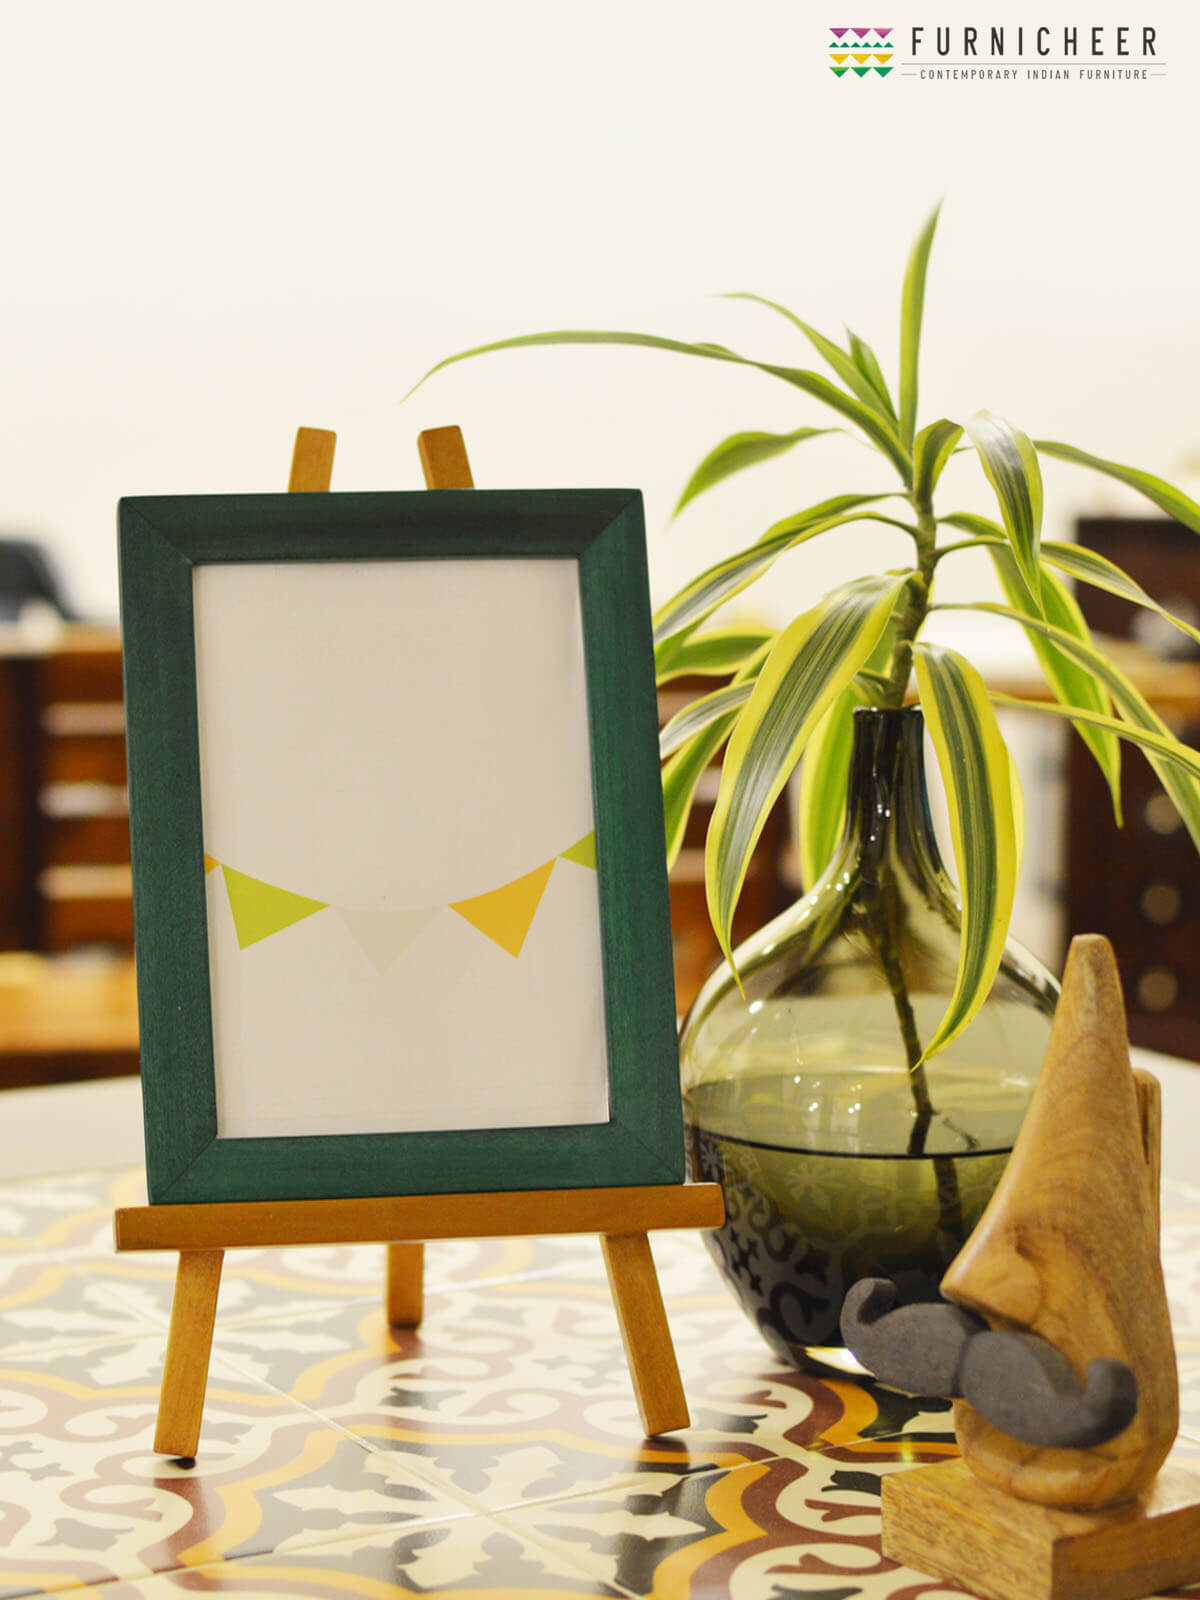 3.PICTURE FRAME WITH EASEL STAND (1)